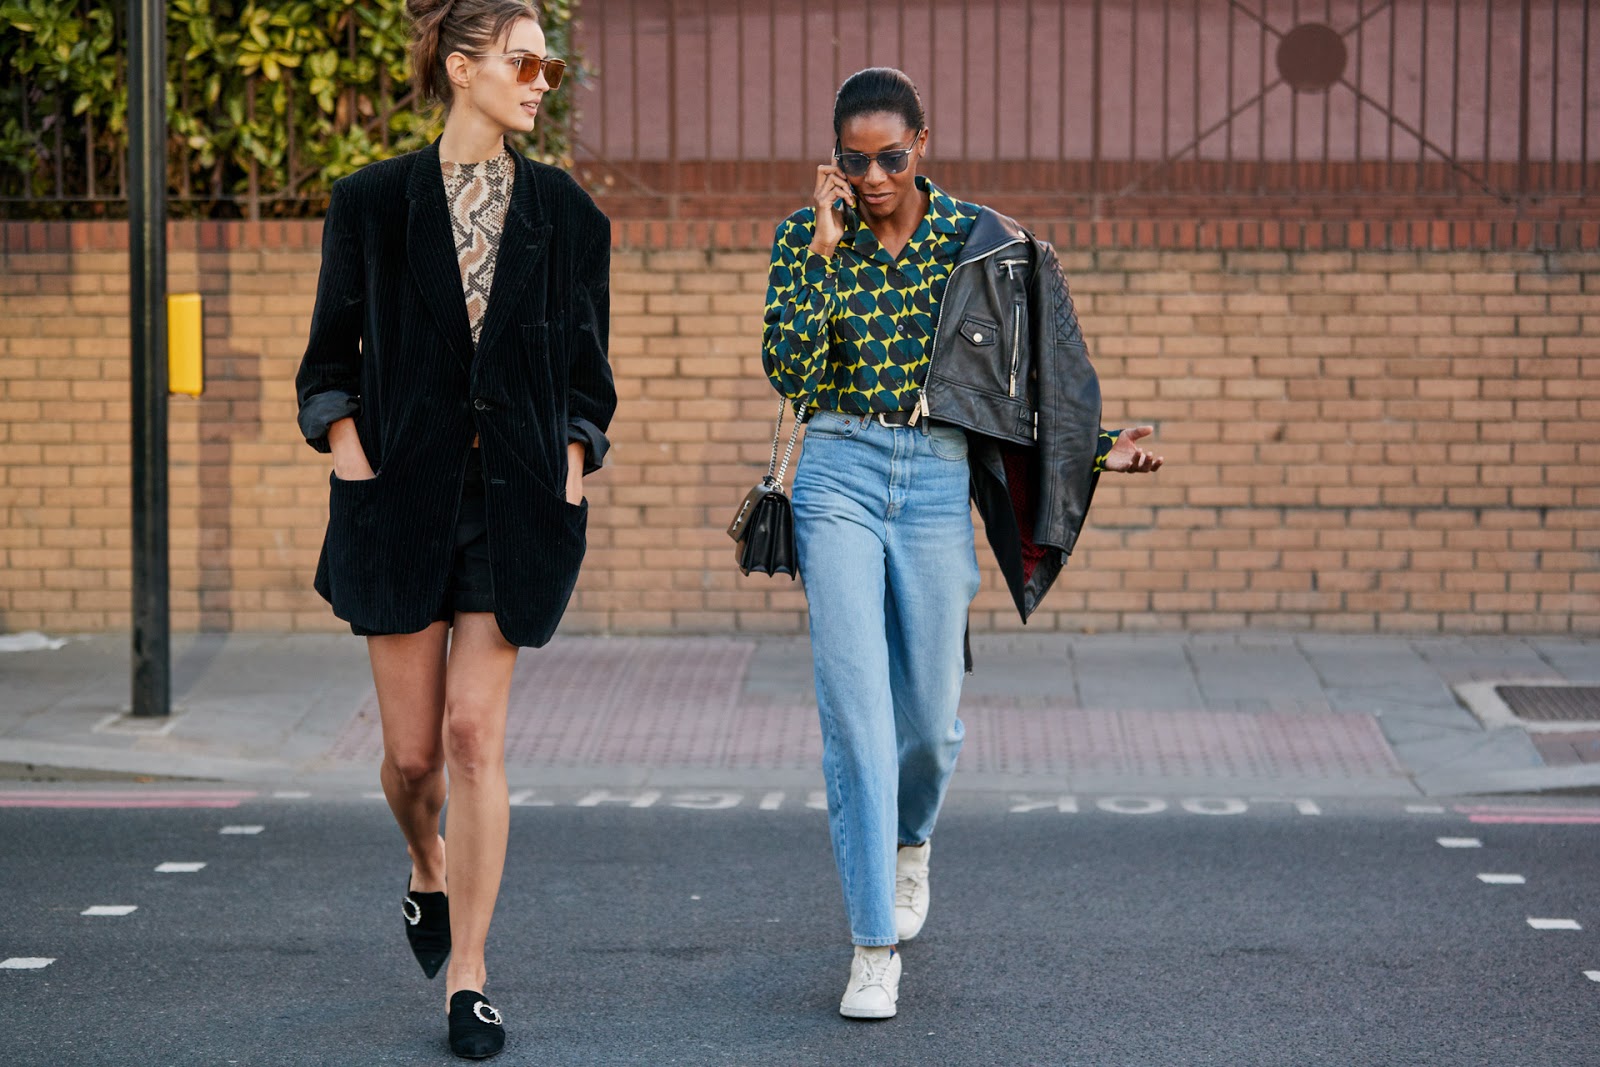 Styling Sneakers in 2021 | The Nashville Edit